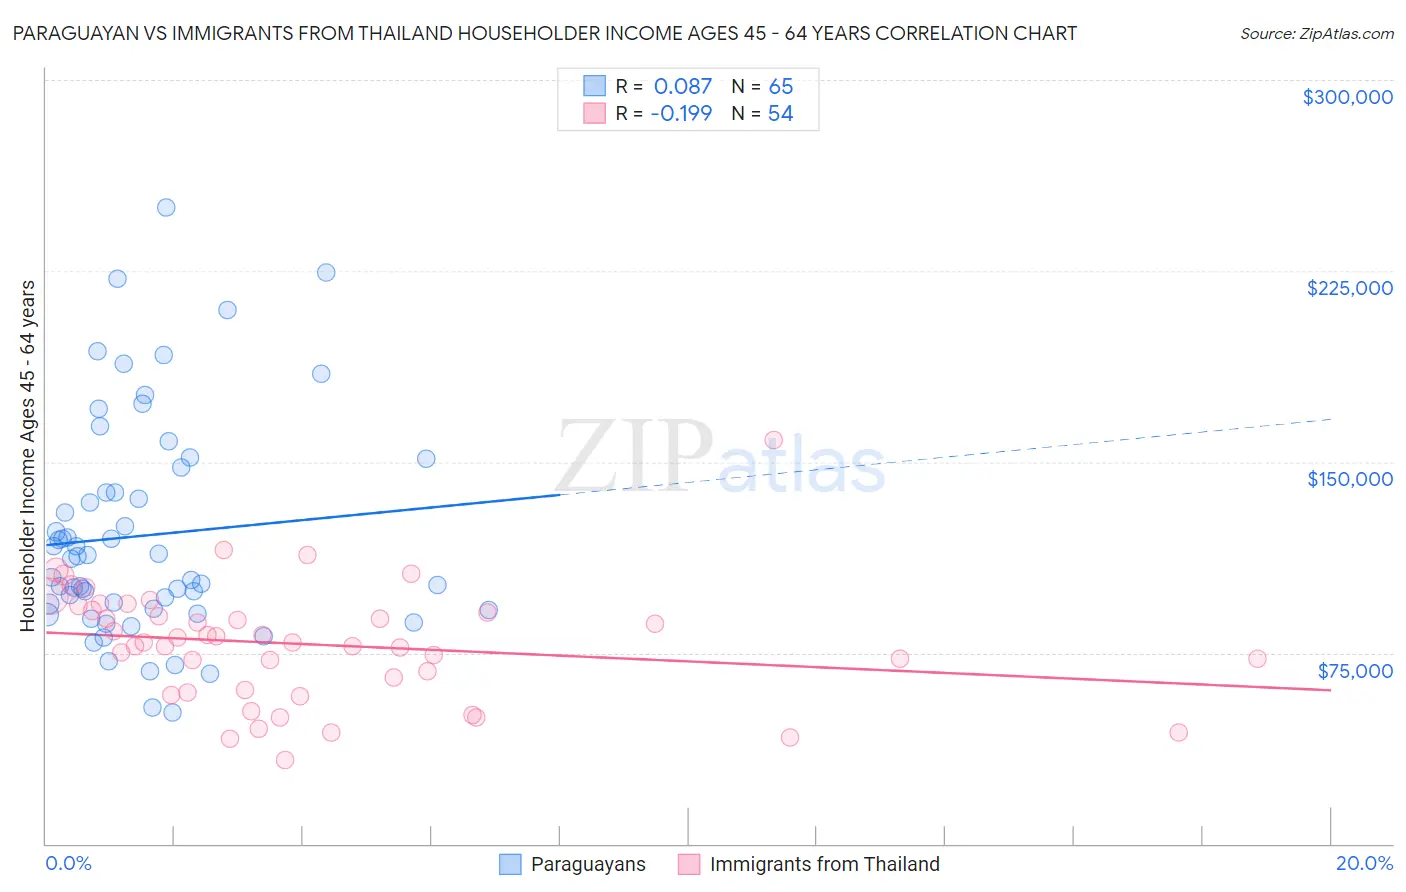 Paraguayan vs Immigrants from Thailand Householder Income Ages 45 - 64 years